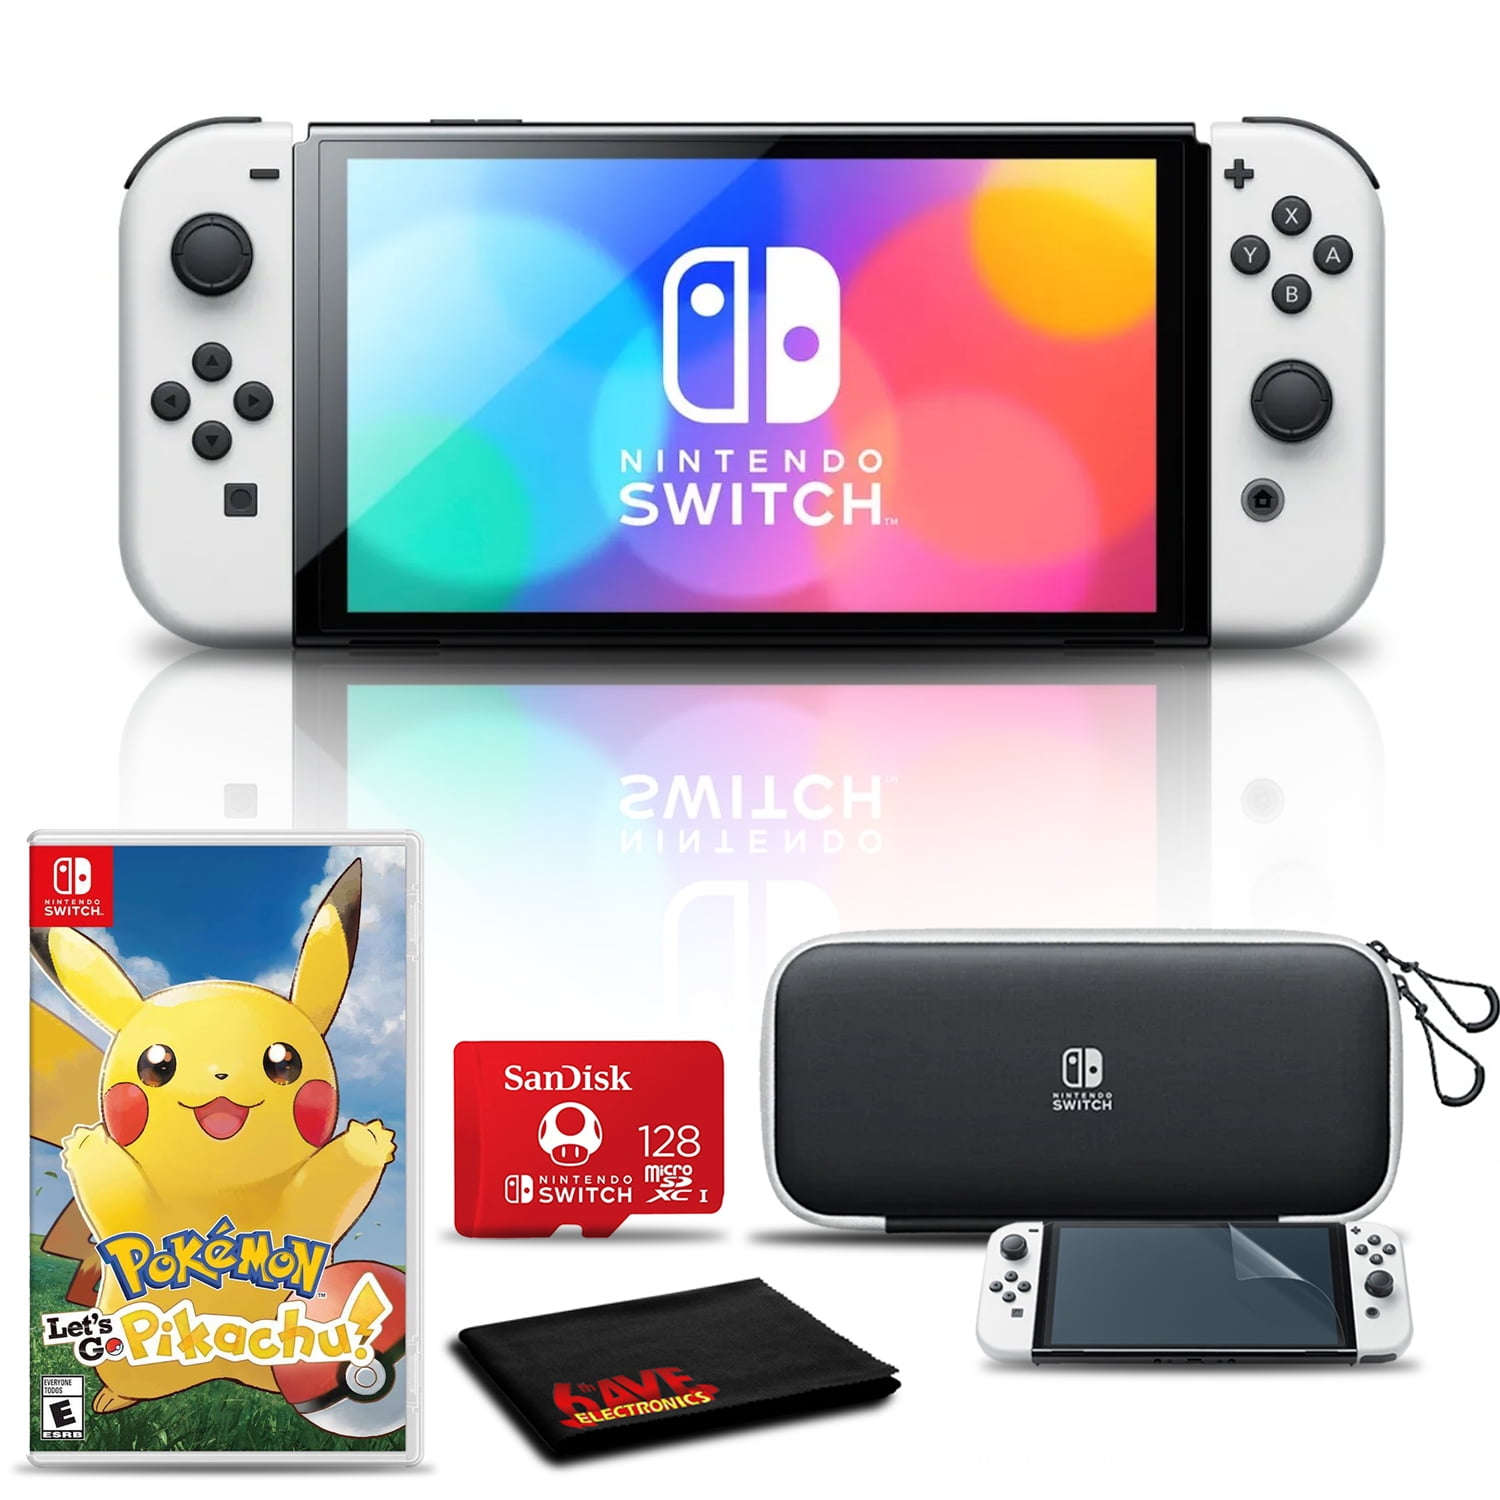 Nintendo Switch OLED White with Let's Go Pikachu, 128GB Card, and More